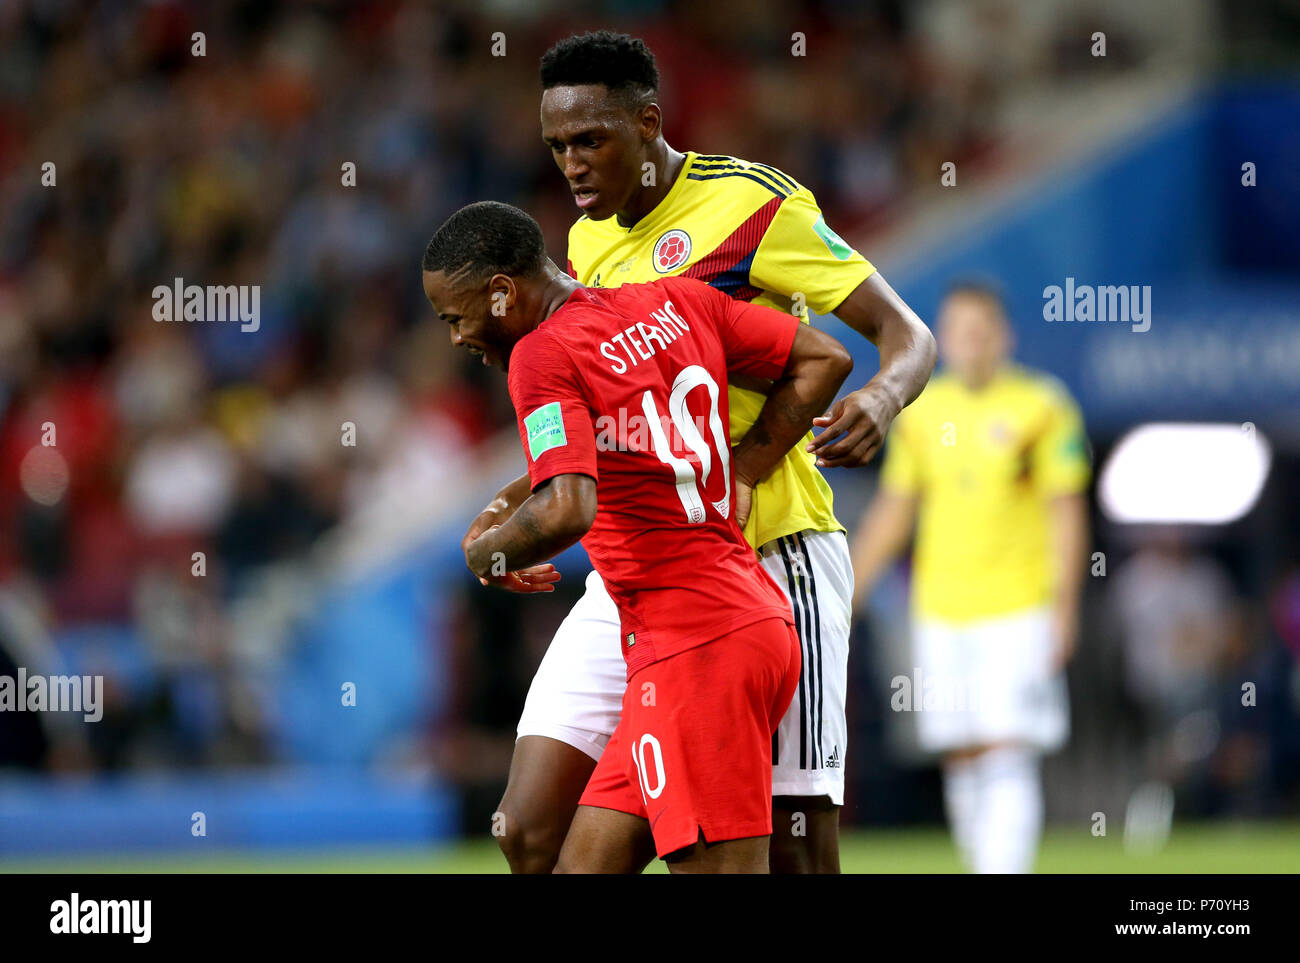 England's Raheem Sterling (front) and Colombia's Yerry Mina appear to clash during the FIFA World Cup 2018, round of 16 match at the Spartak Stadium, Moscow. Stock Photo